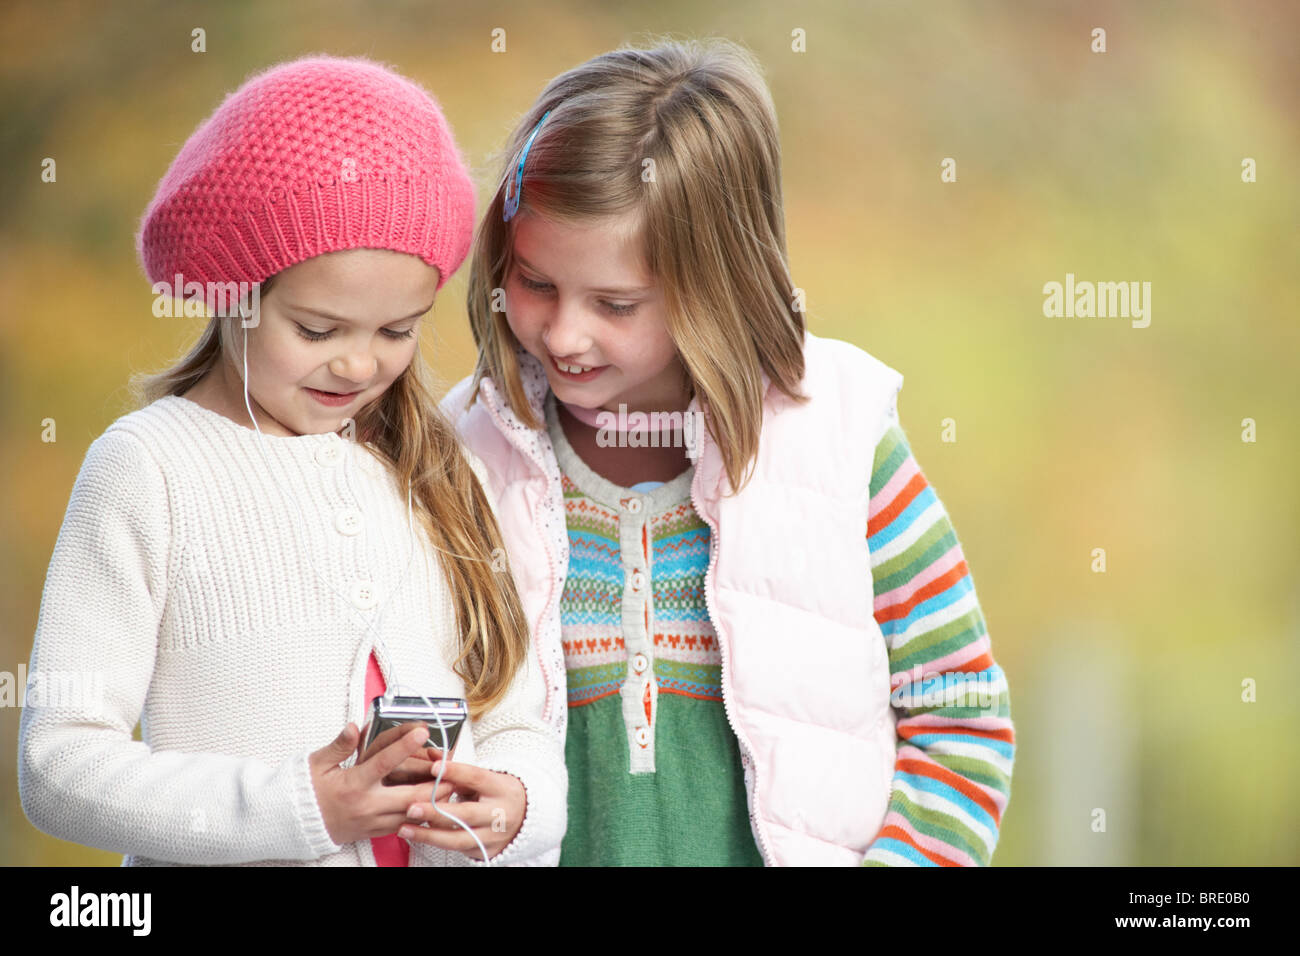 Two Young Girl Outdoors With MP3 Player Stock Photo